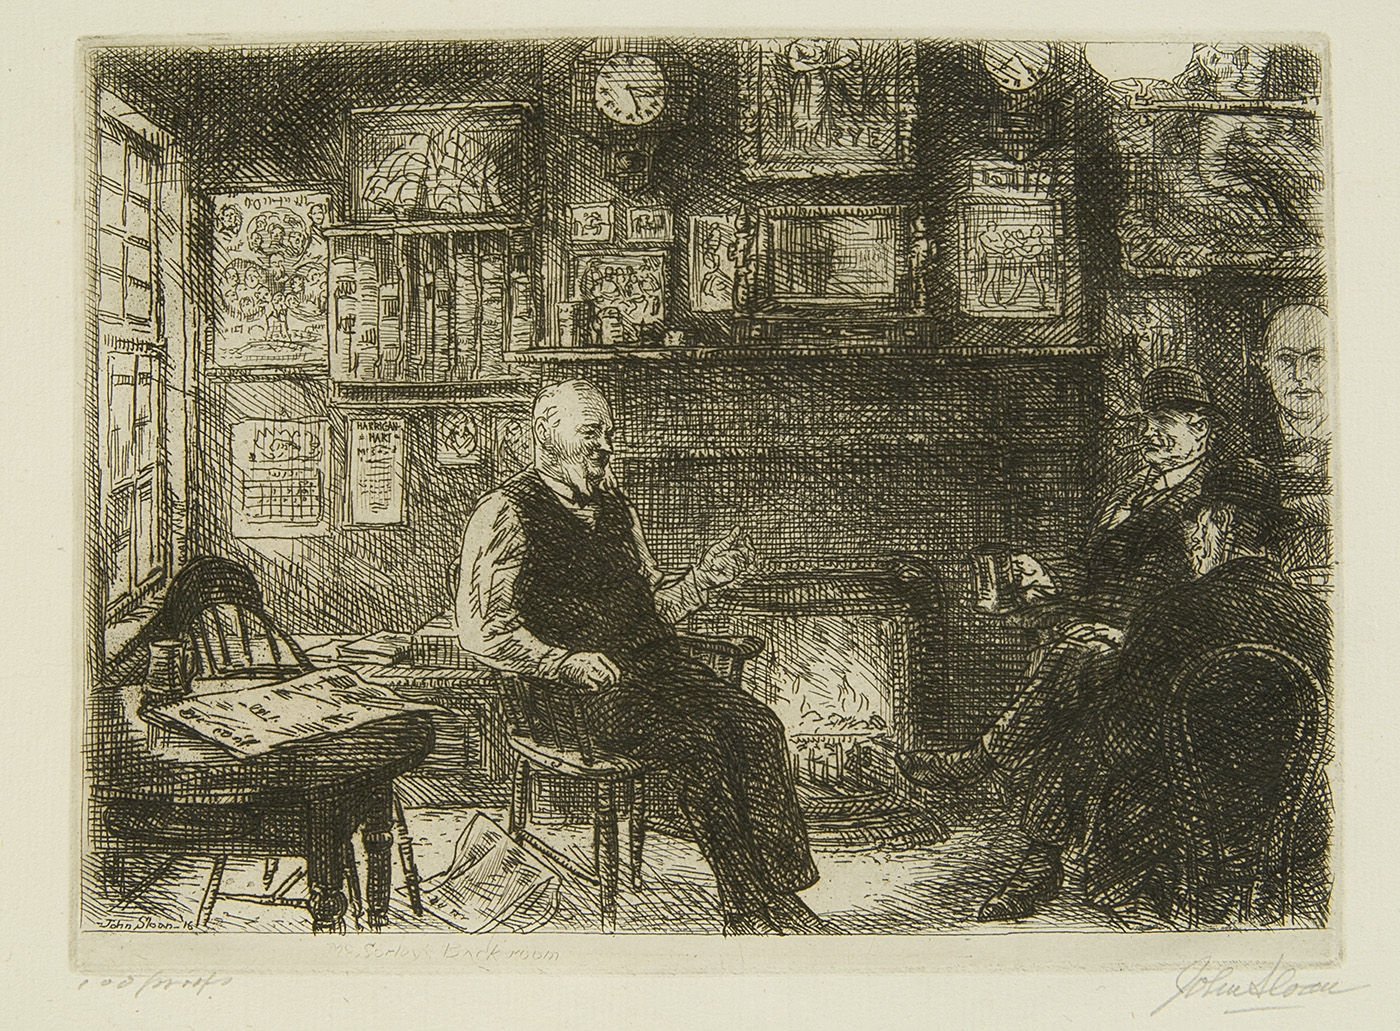 Etching of three men sitting and drinking by a fire